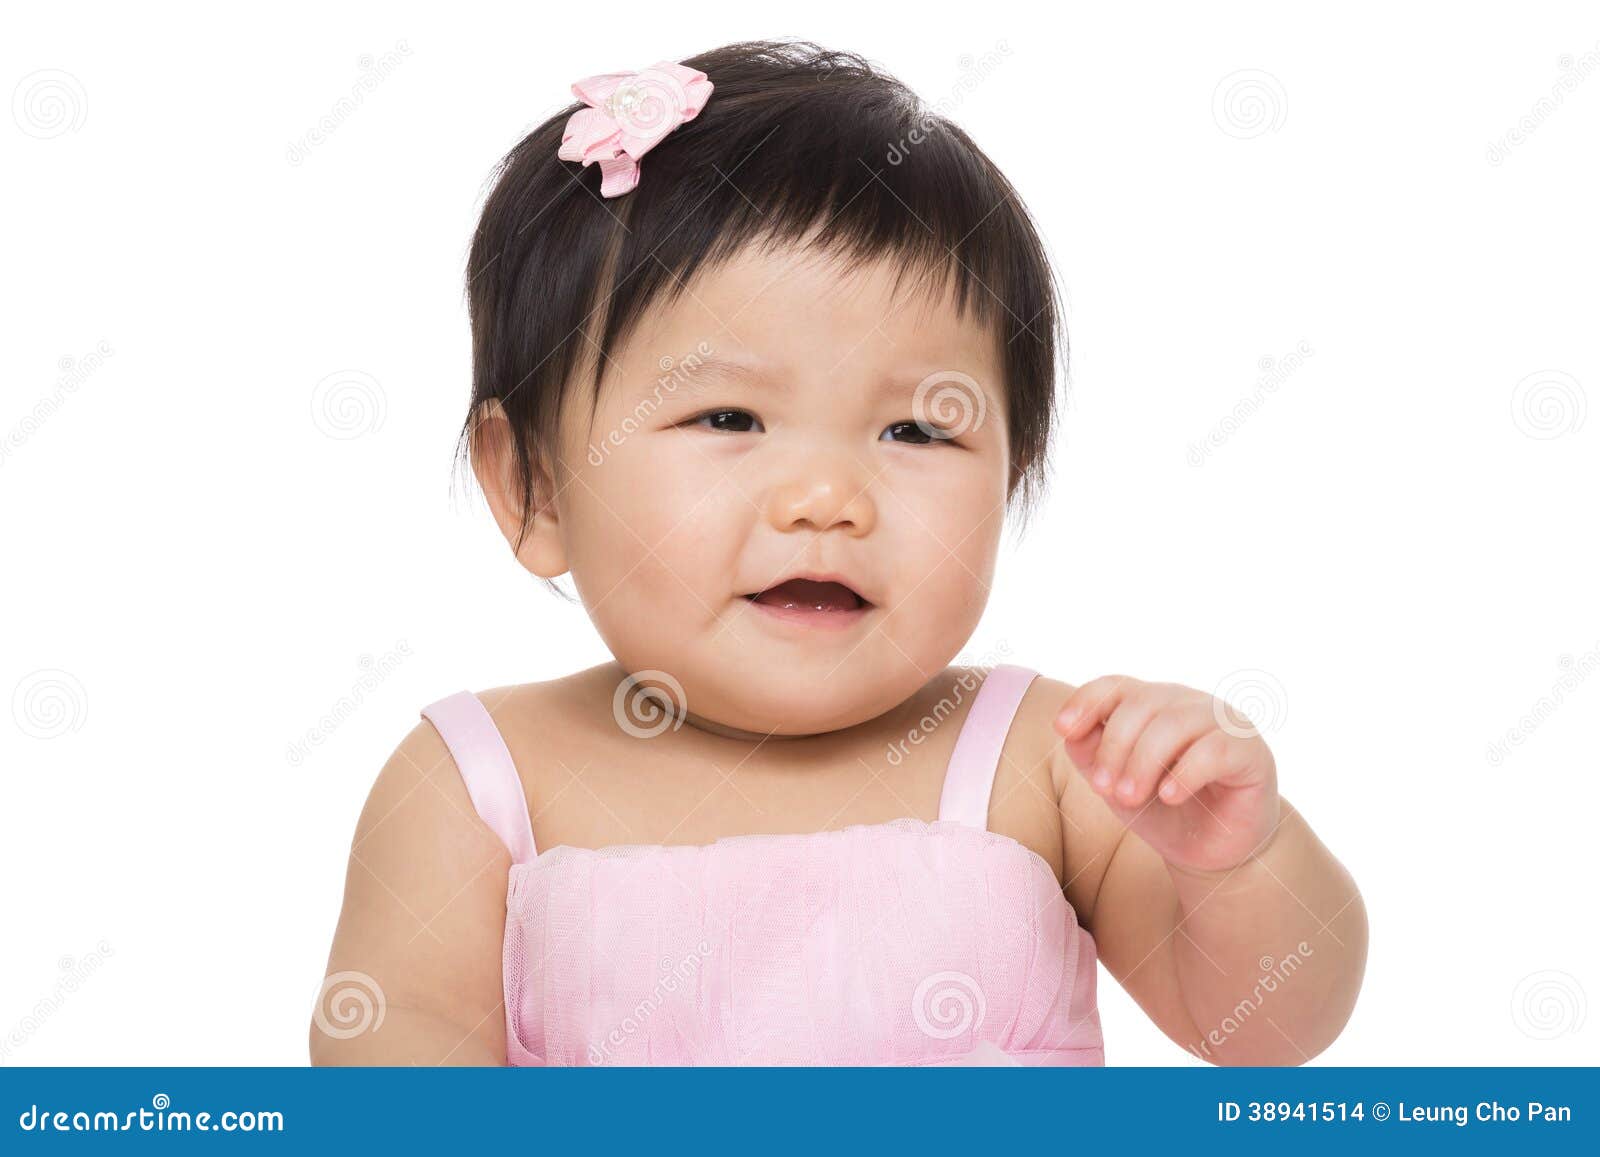 Asia baby girl portrait stock photo. Image of person - 38941514